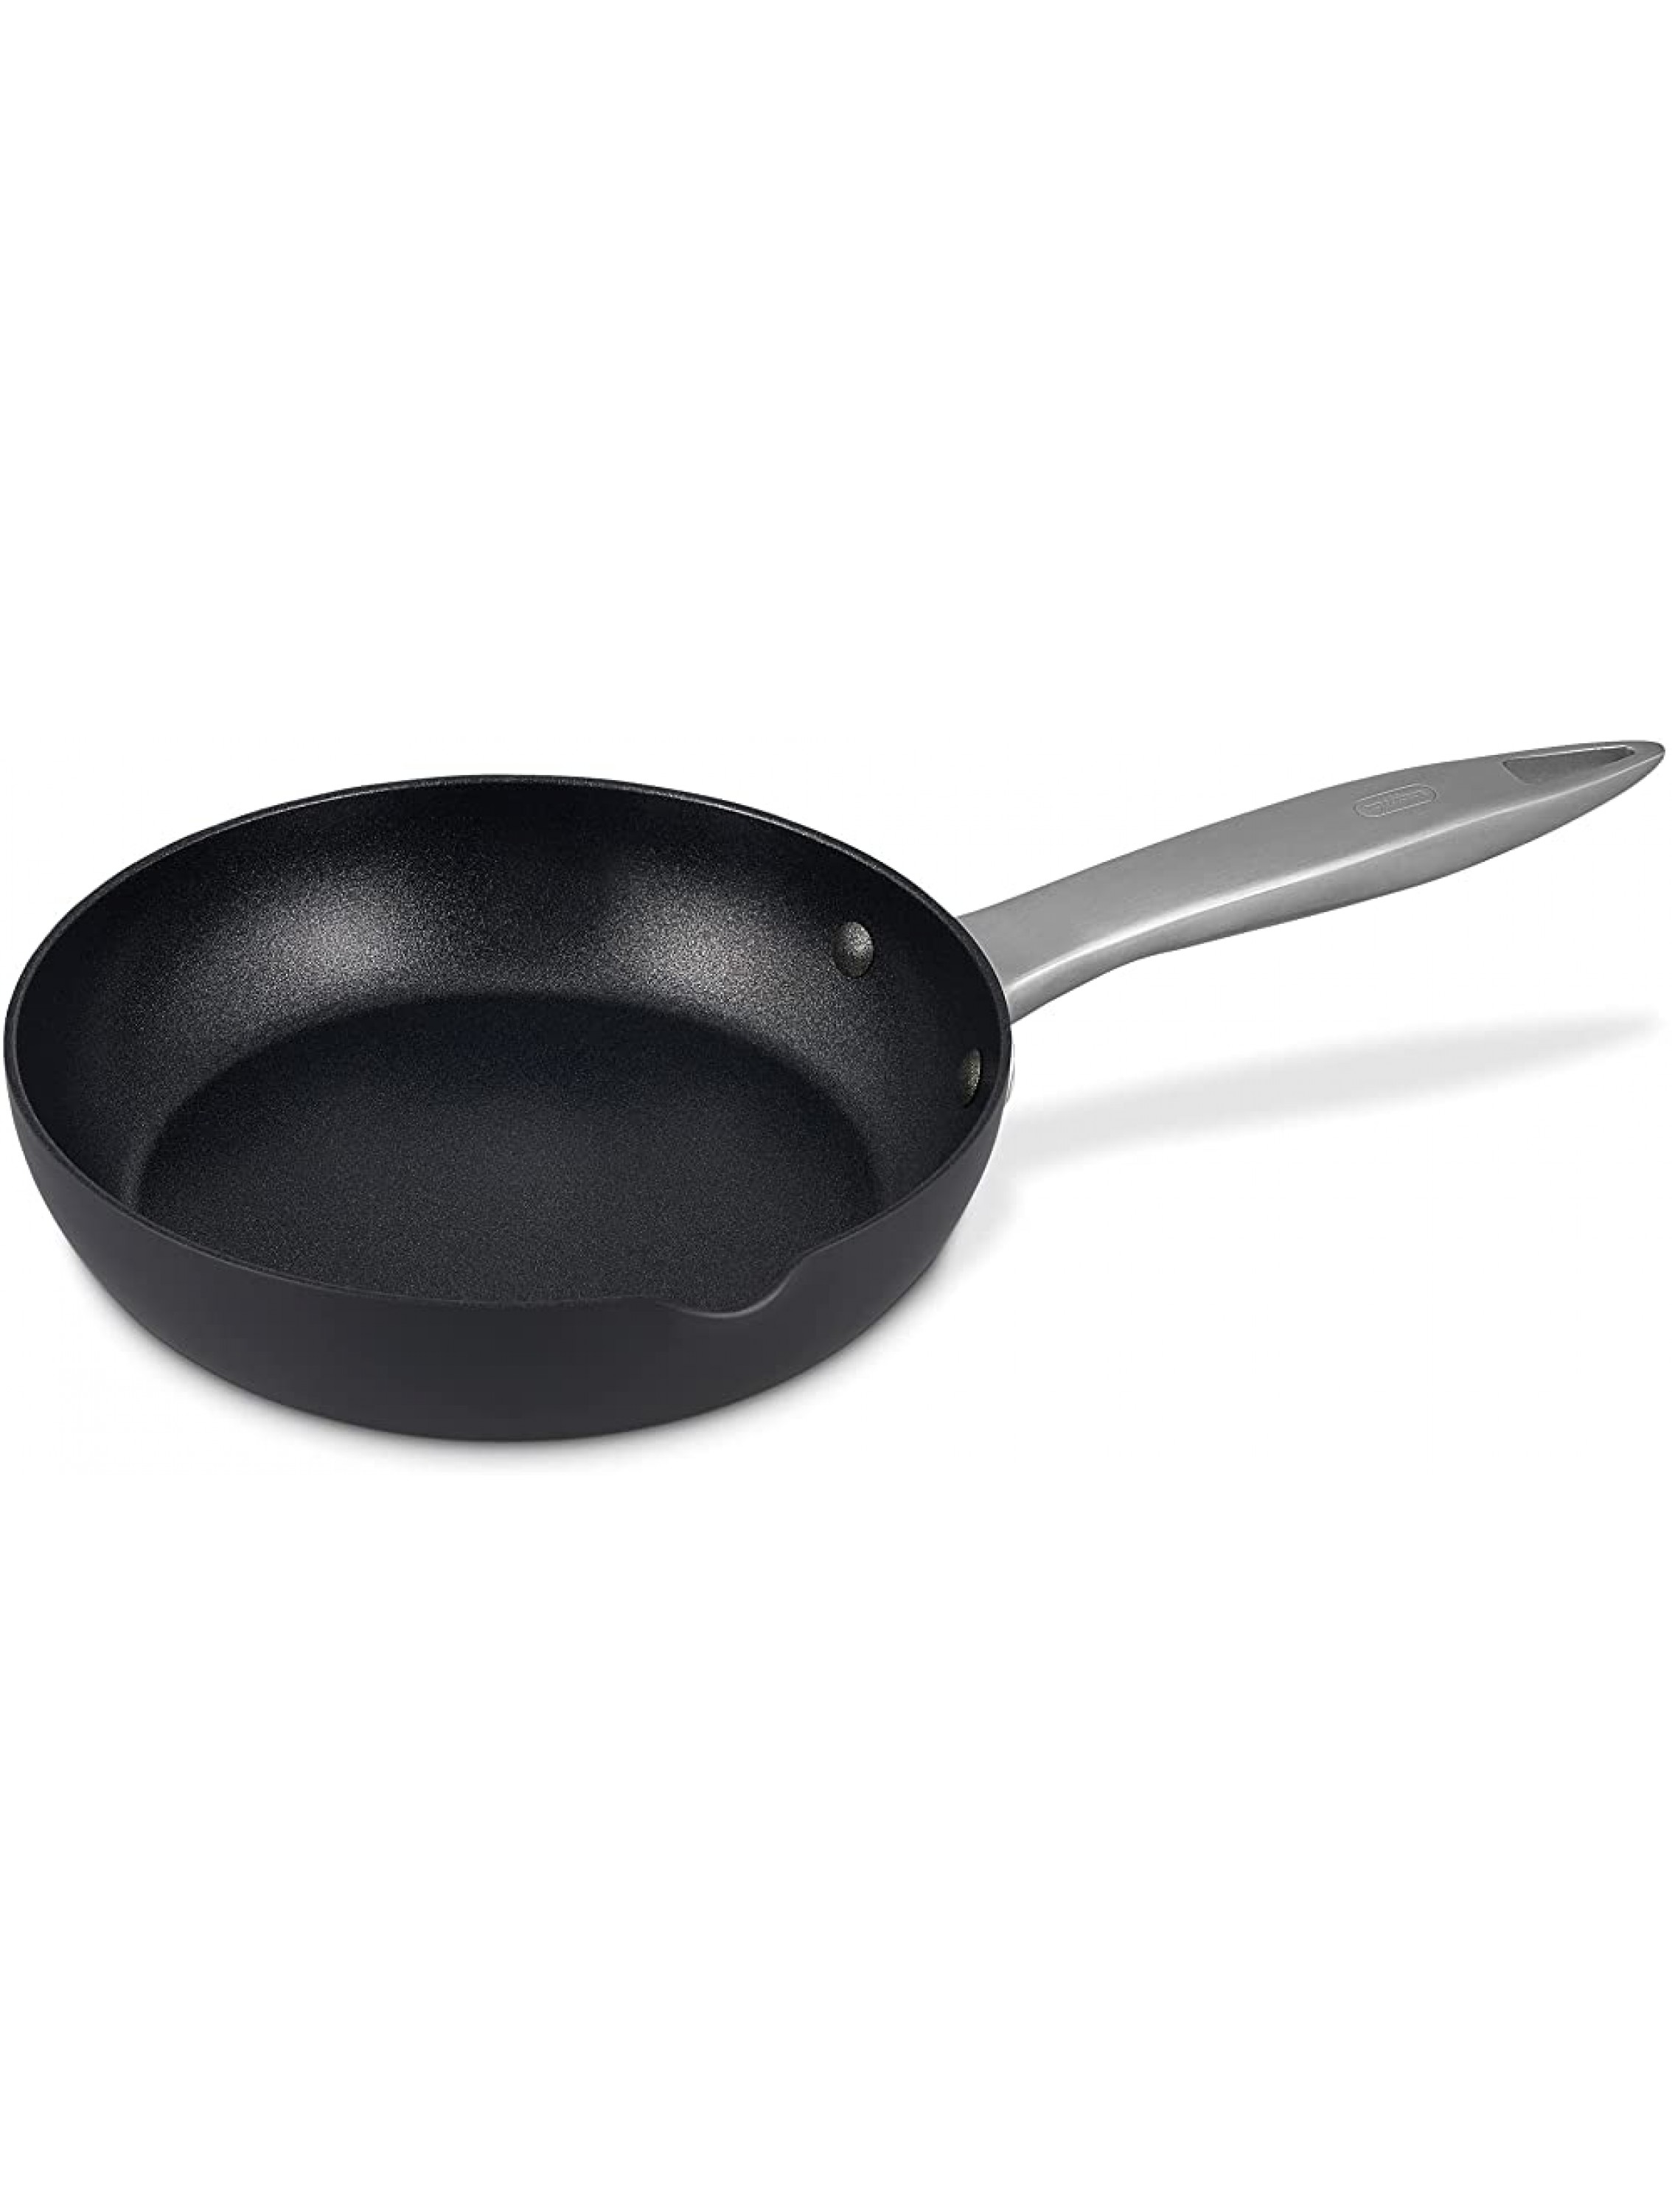 Zyliss Ultimate Pro Nonstick Frying Pan 8 Hard Anodized Cookware with Pour Spout - BJ363BZ78